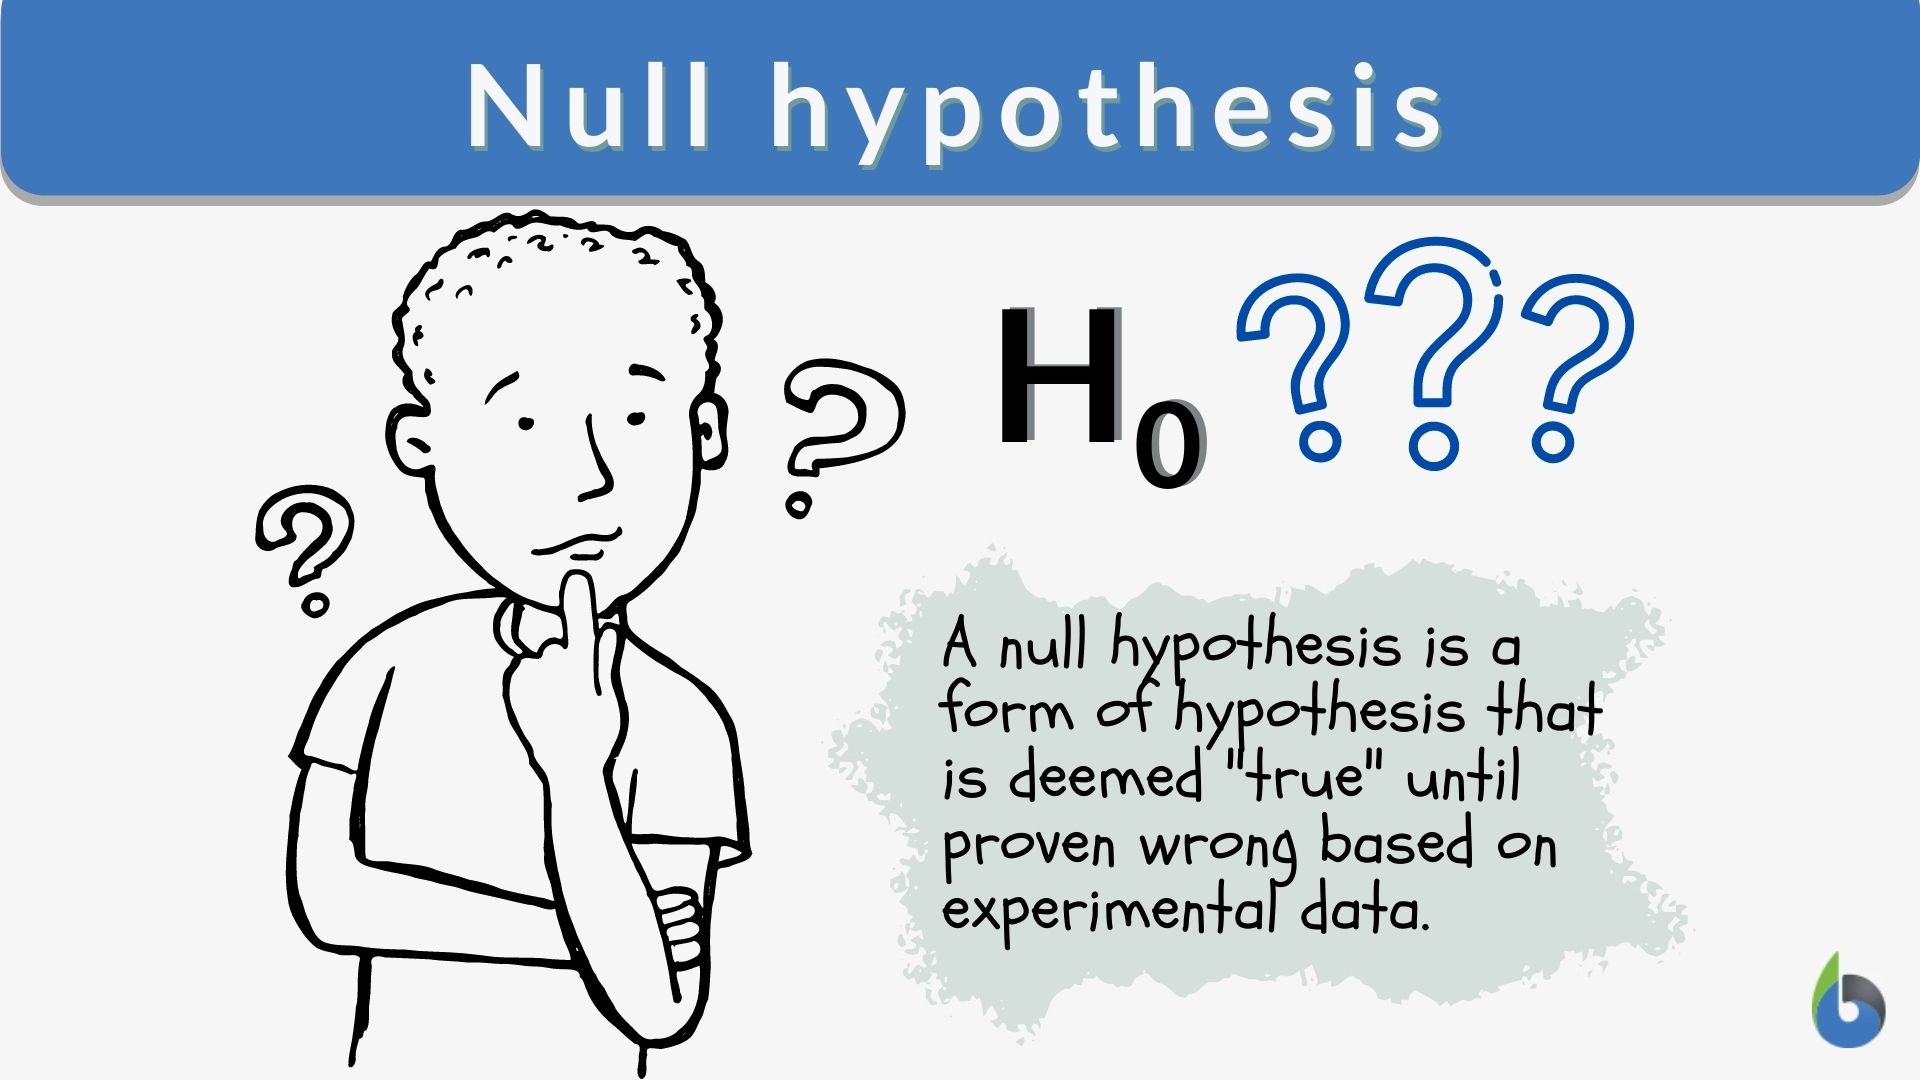 what null hypothesis do